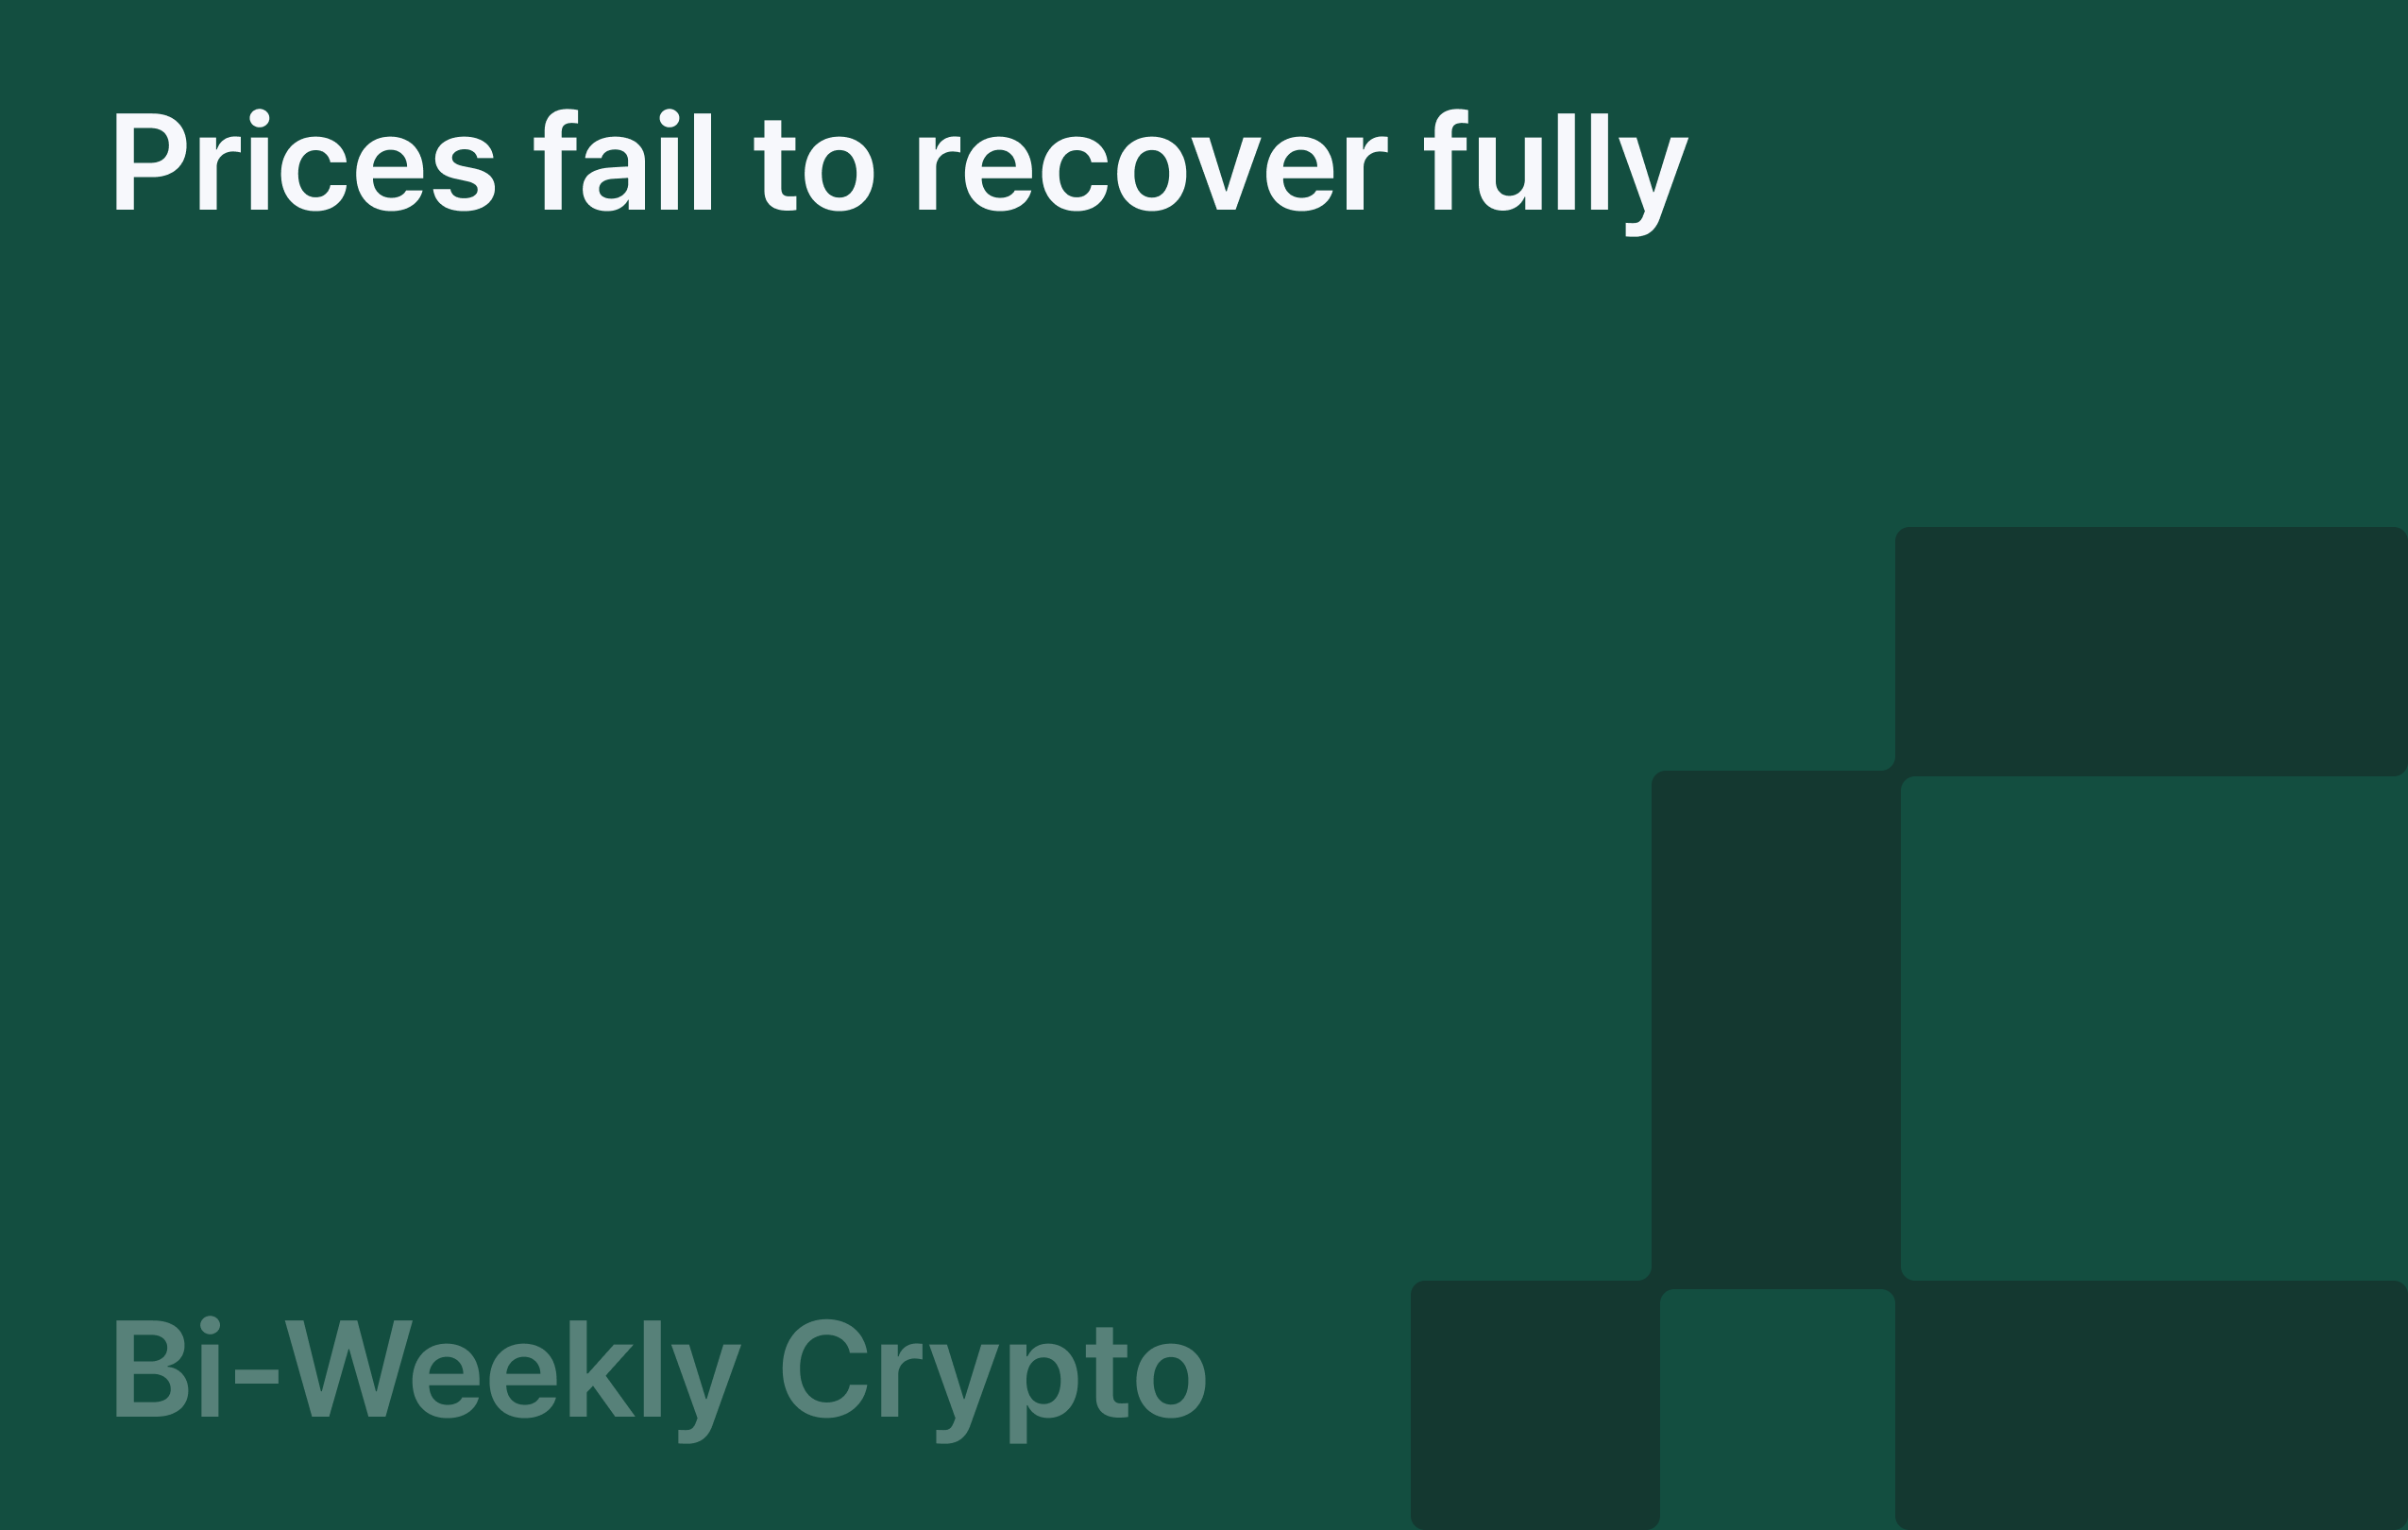 Bi-Weekly Crypto: Prices fail to recover fully